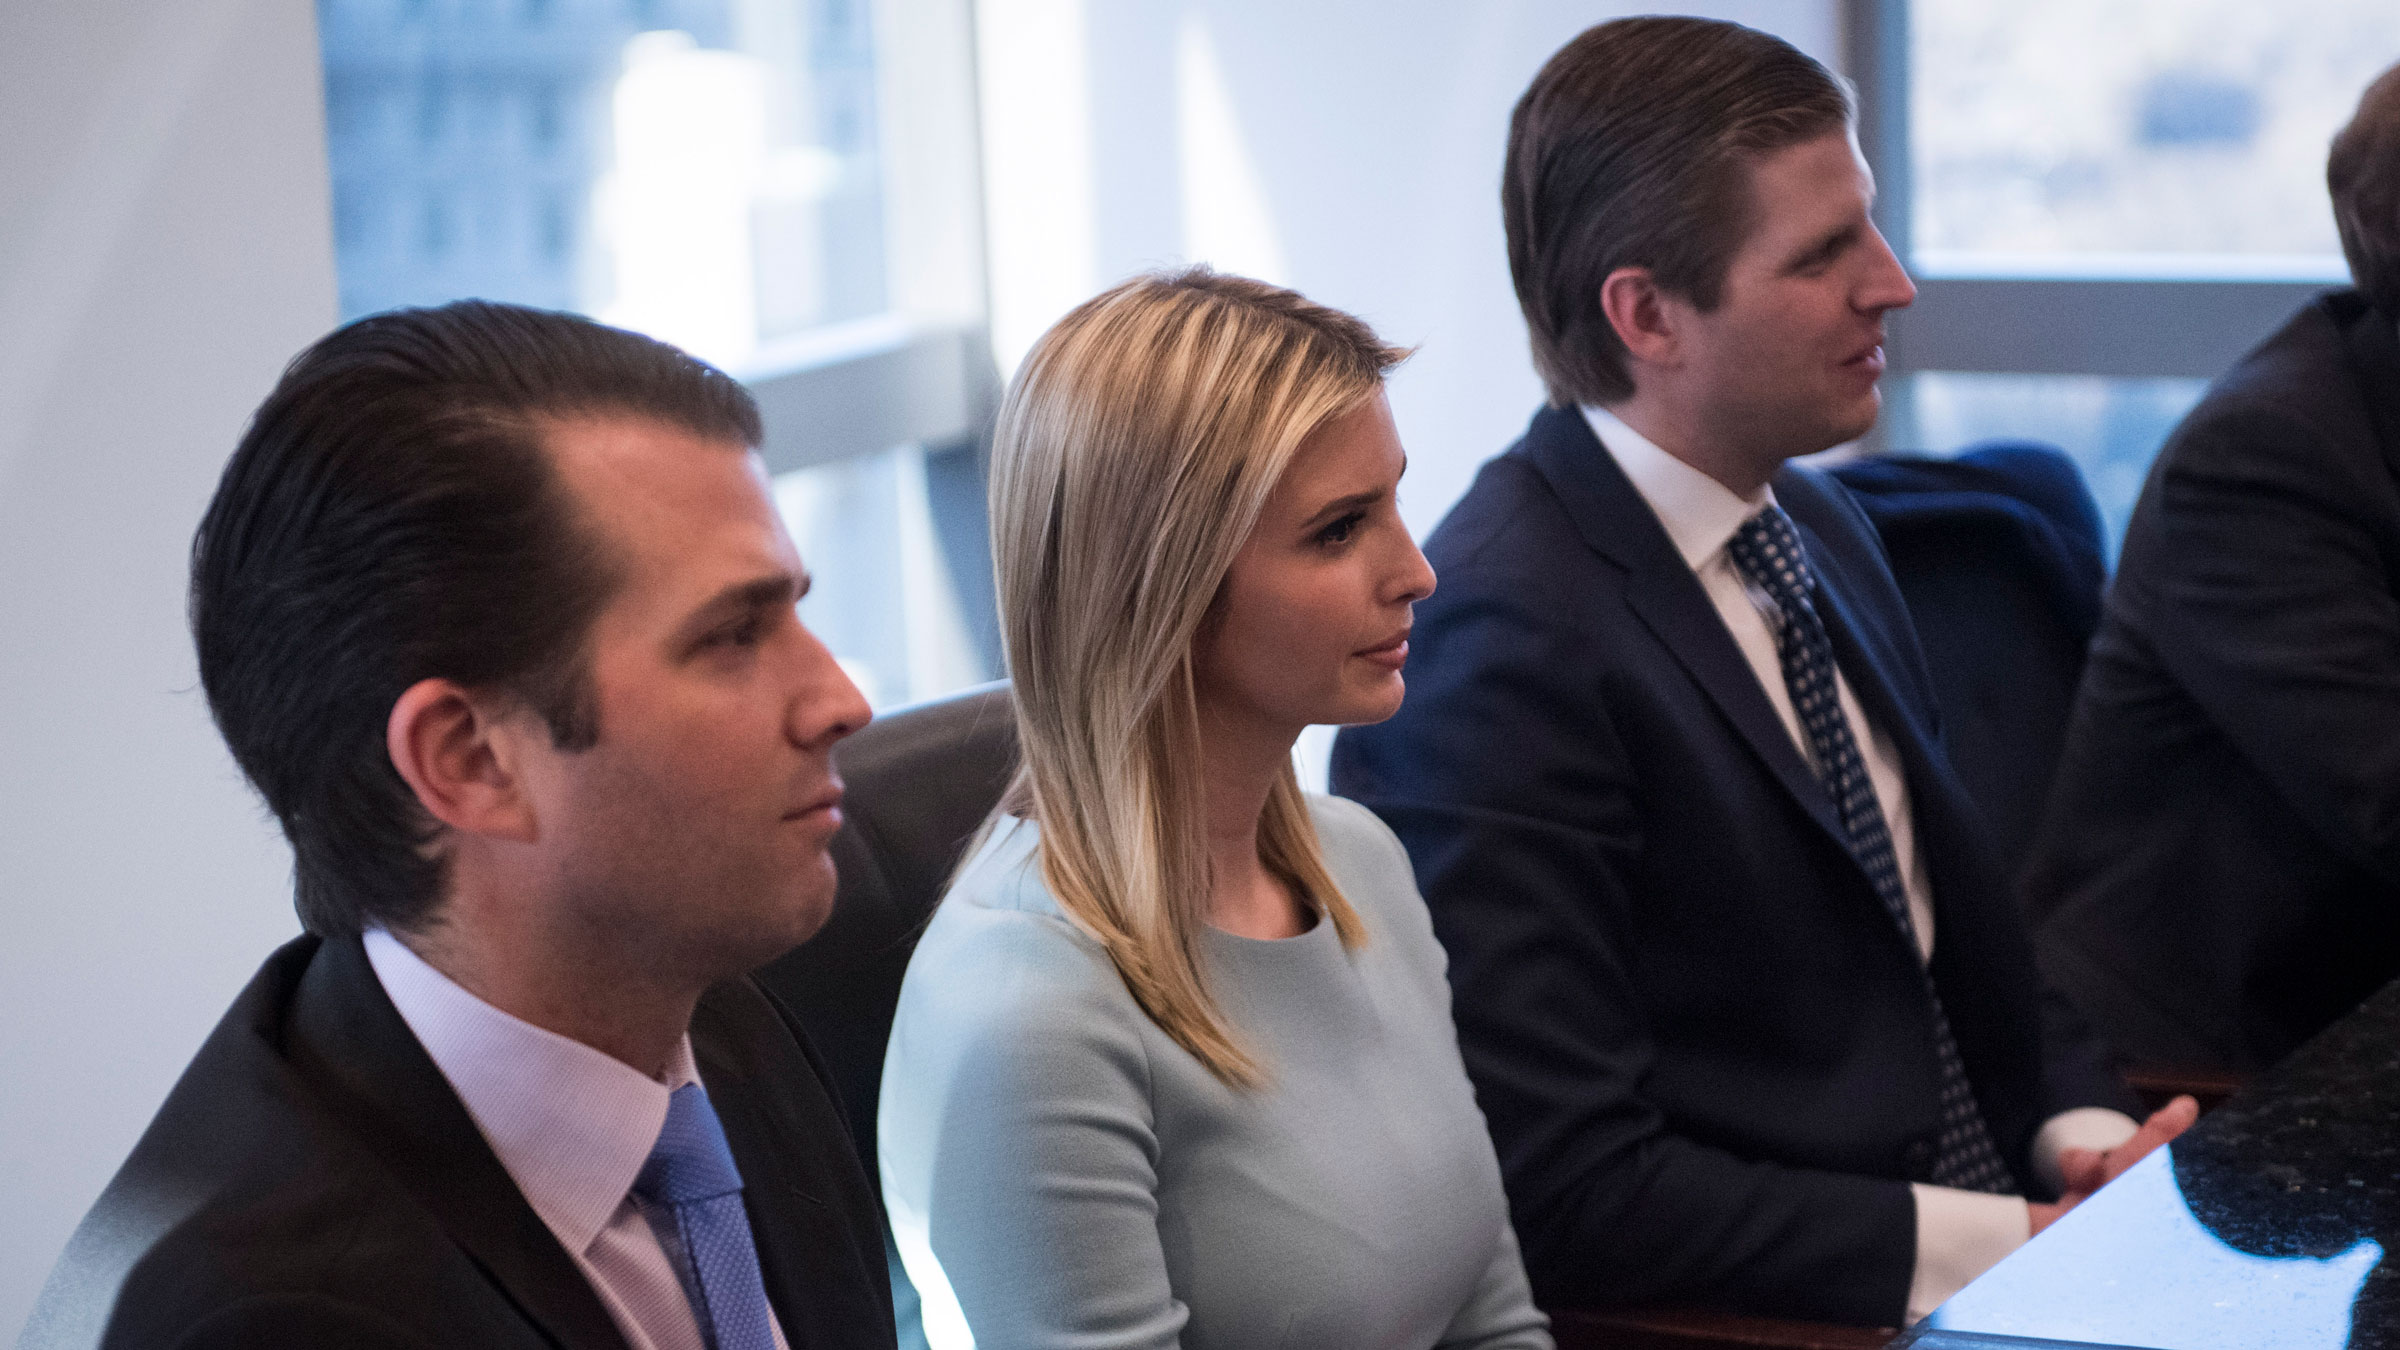 From left, Donald Trump Jr., Ivanka Trump and Eric Trump attend a meeting at Trump Tower in New York in 2016.